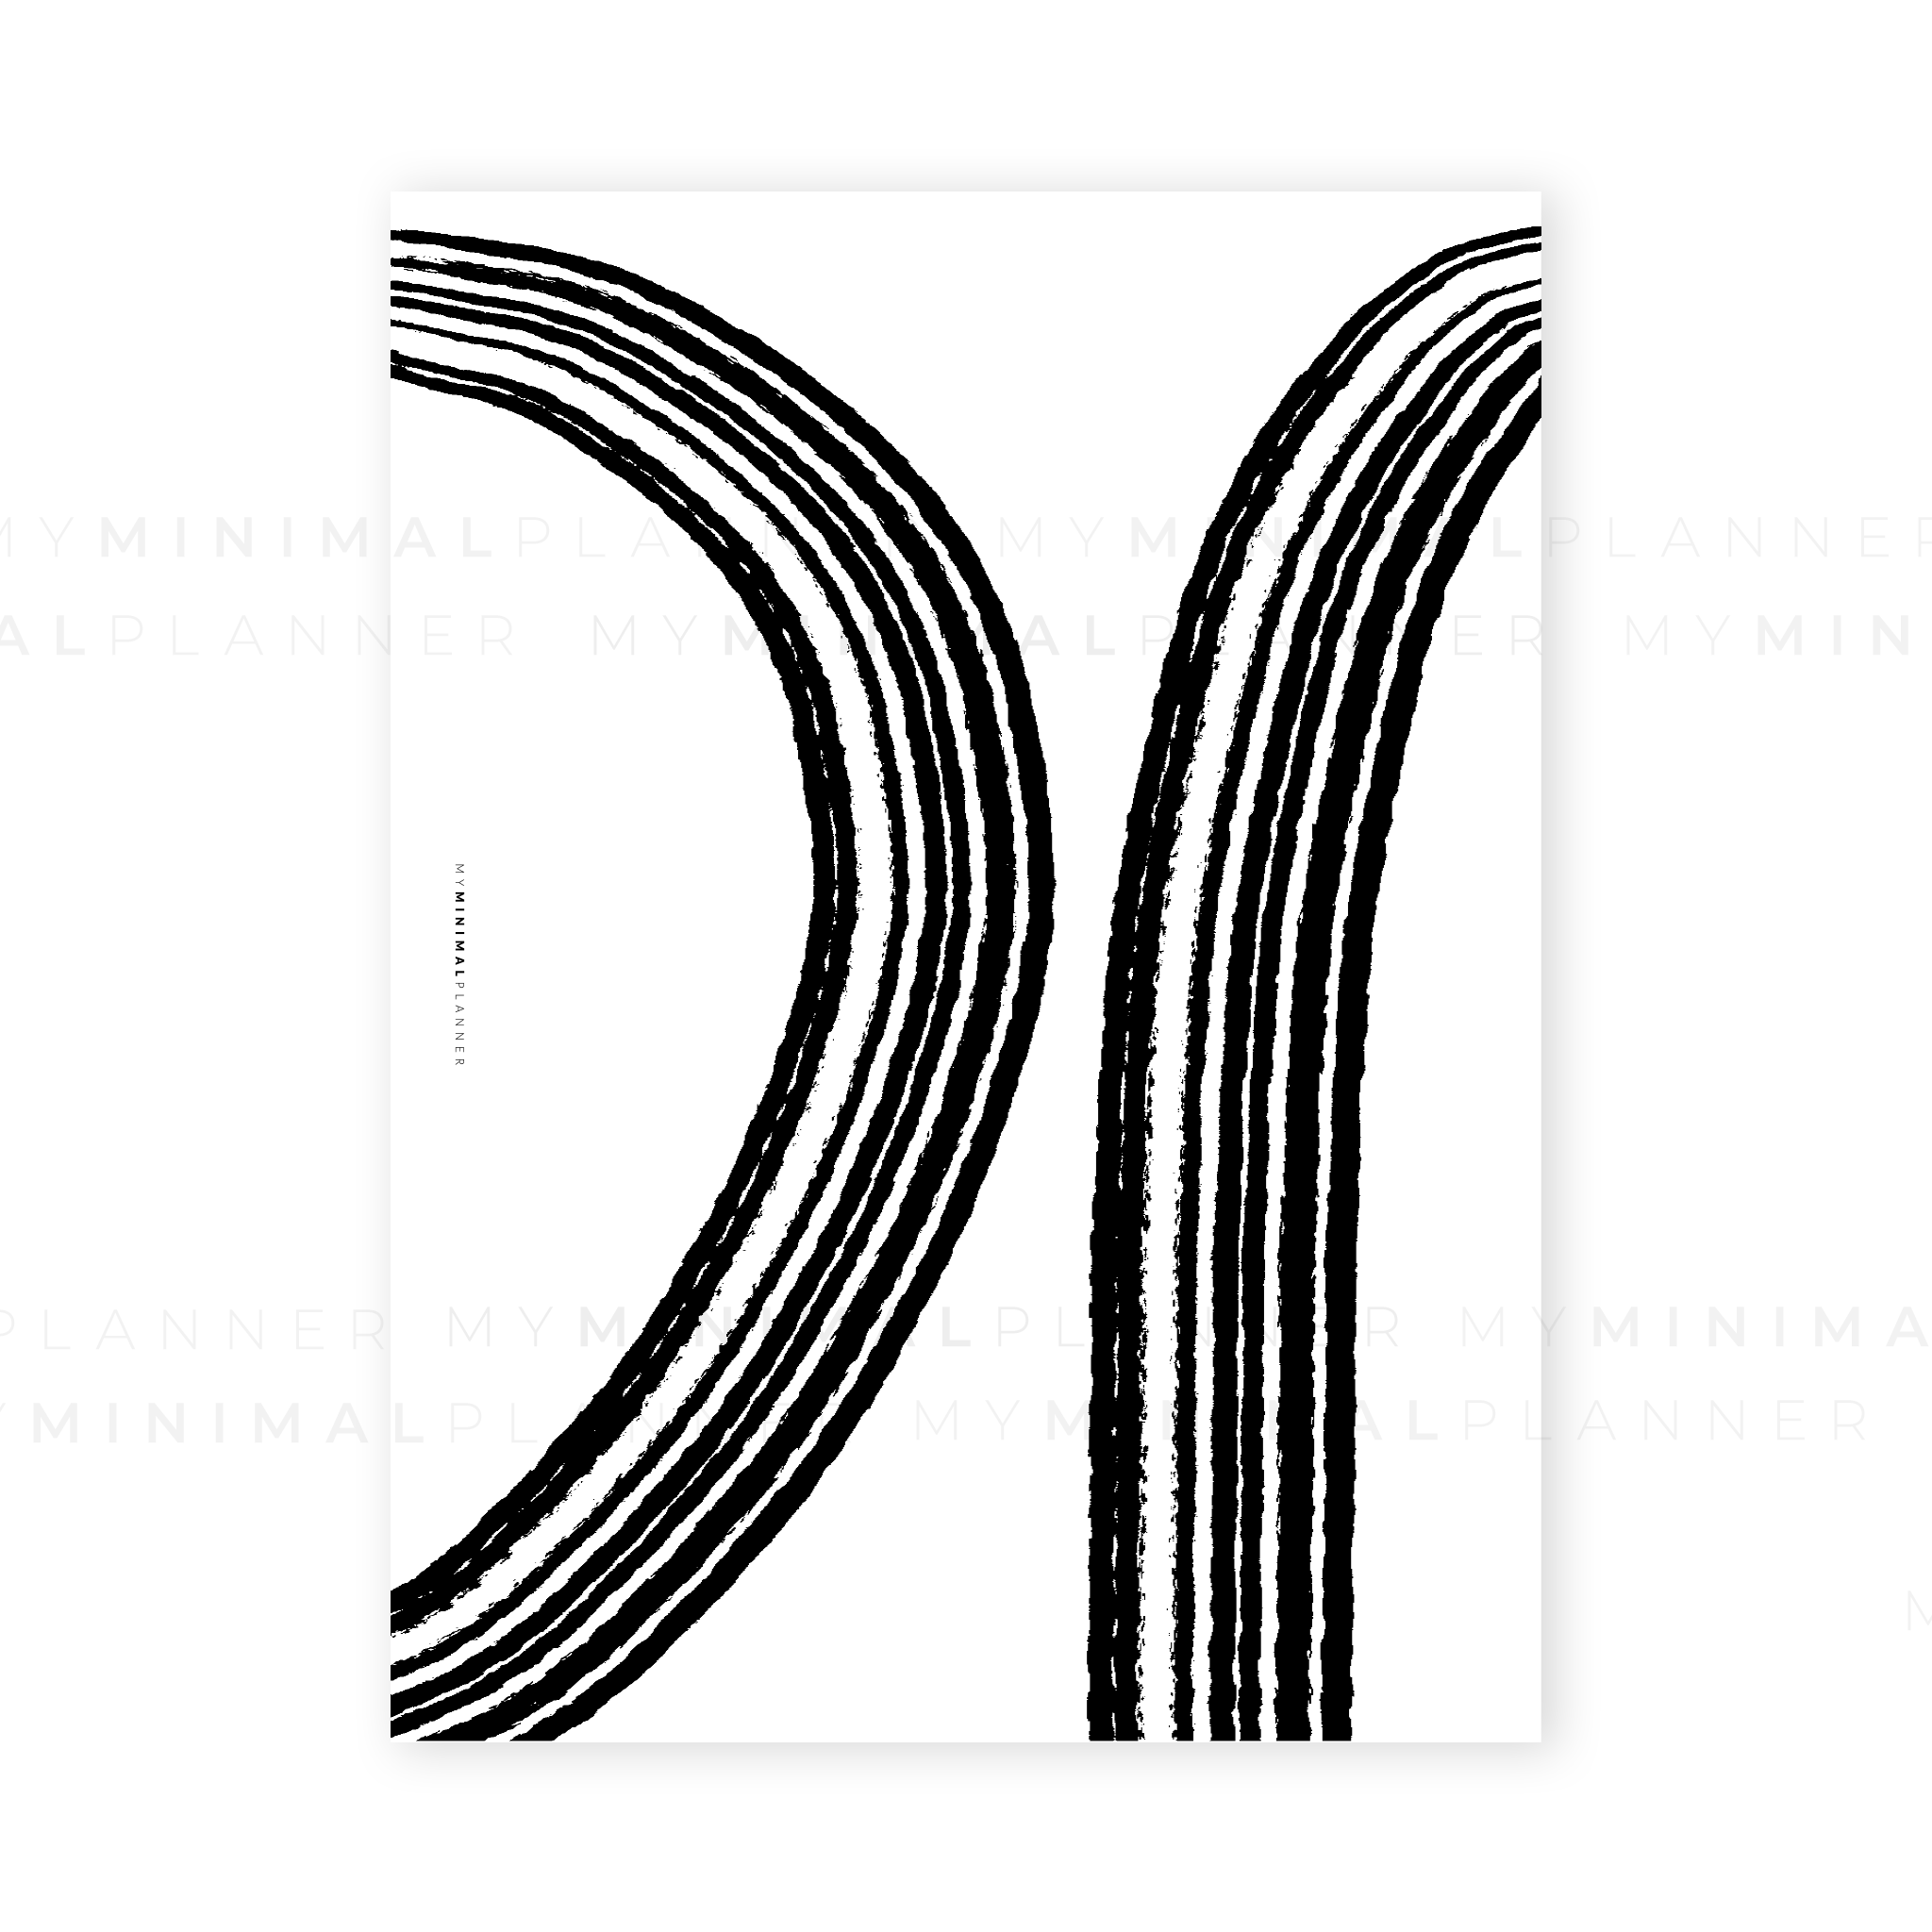 PRD81 - The Abstracts - Printable Dashboard